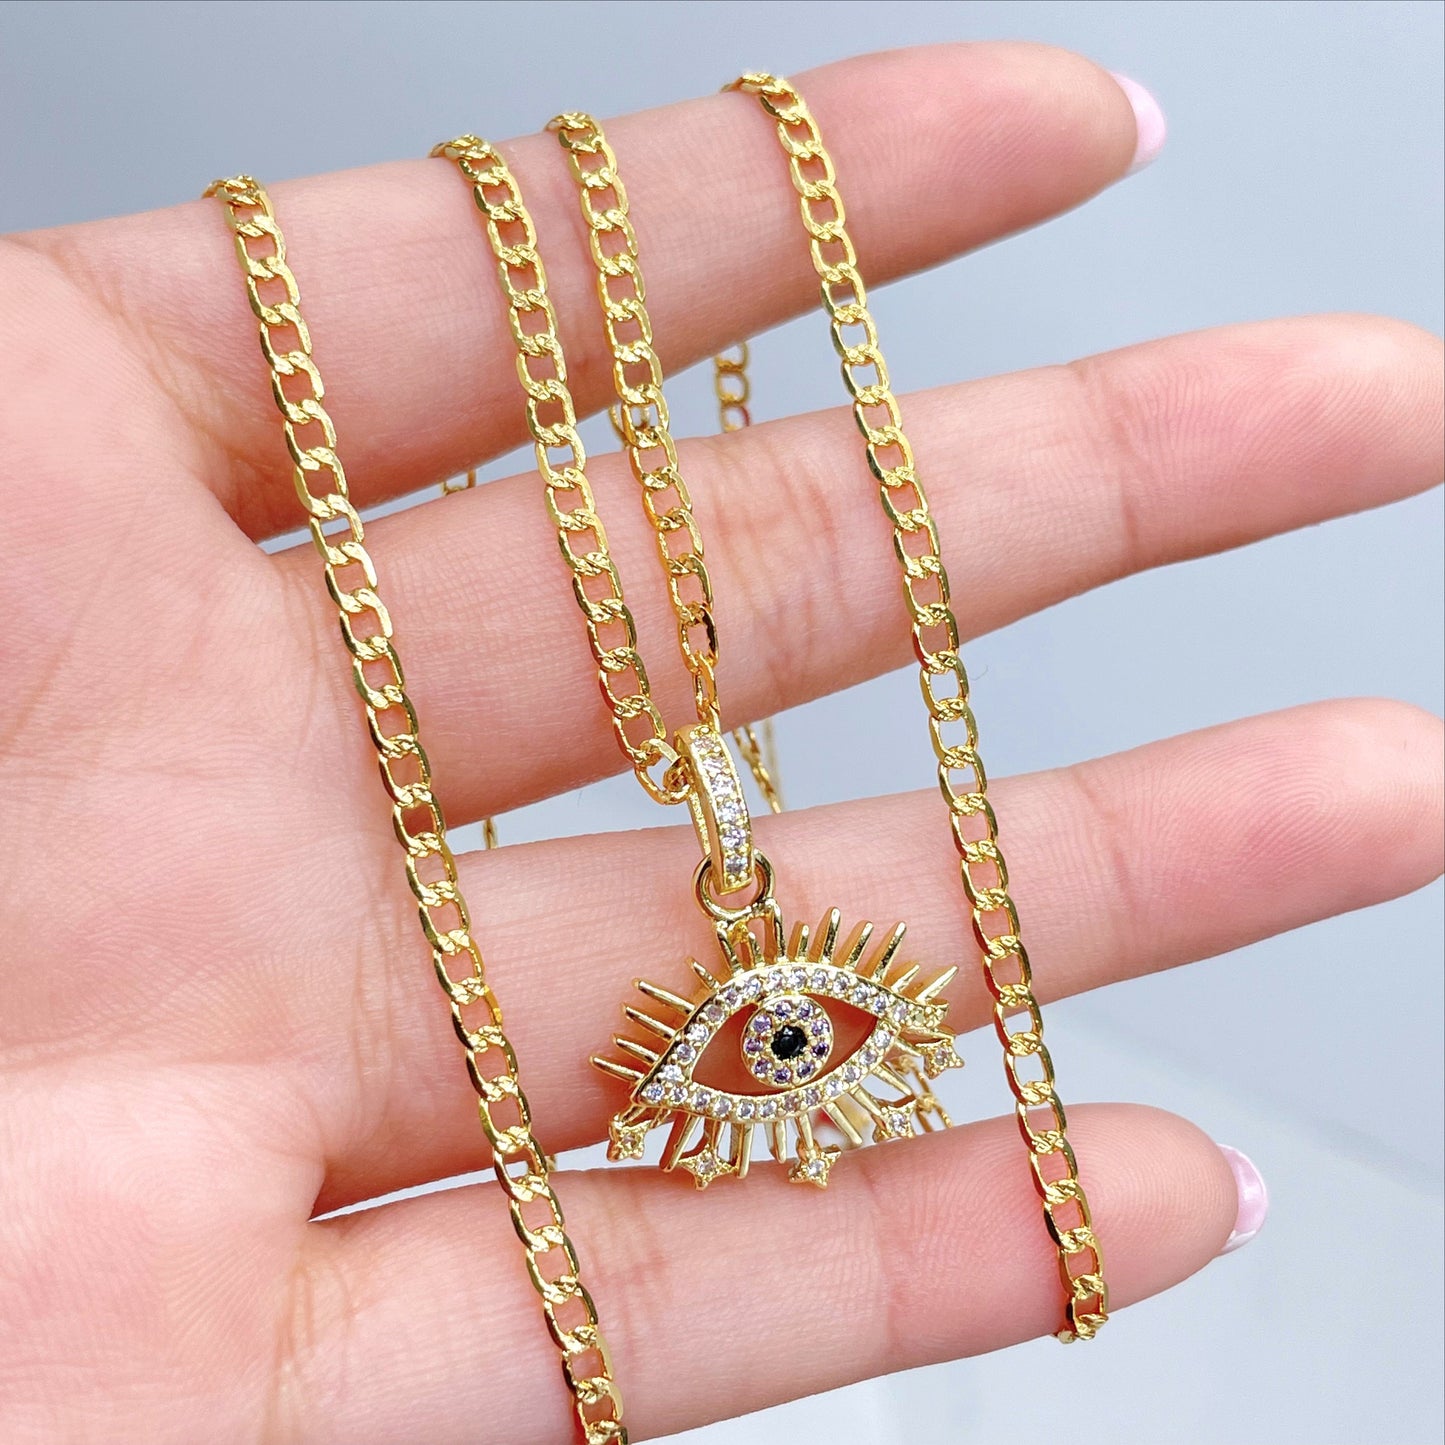 18k Gold Filled 2mm Curb Link Chain, Evil Eye with Stars and Micro Cubic Zirconia, Earrings and Charm, Wholesale Jewelry Making Supplies